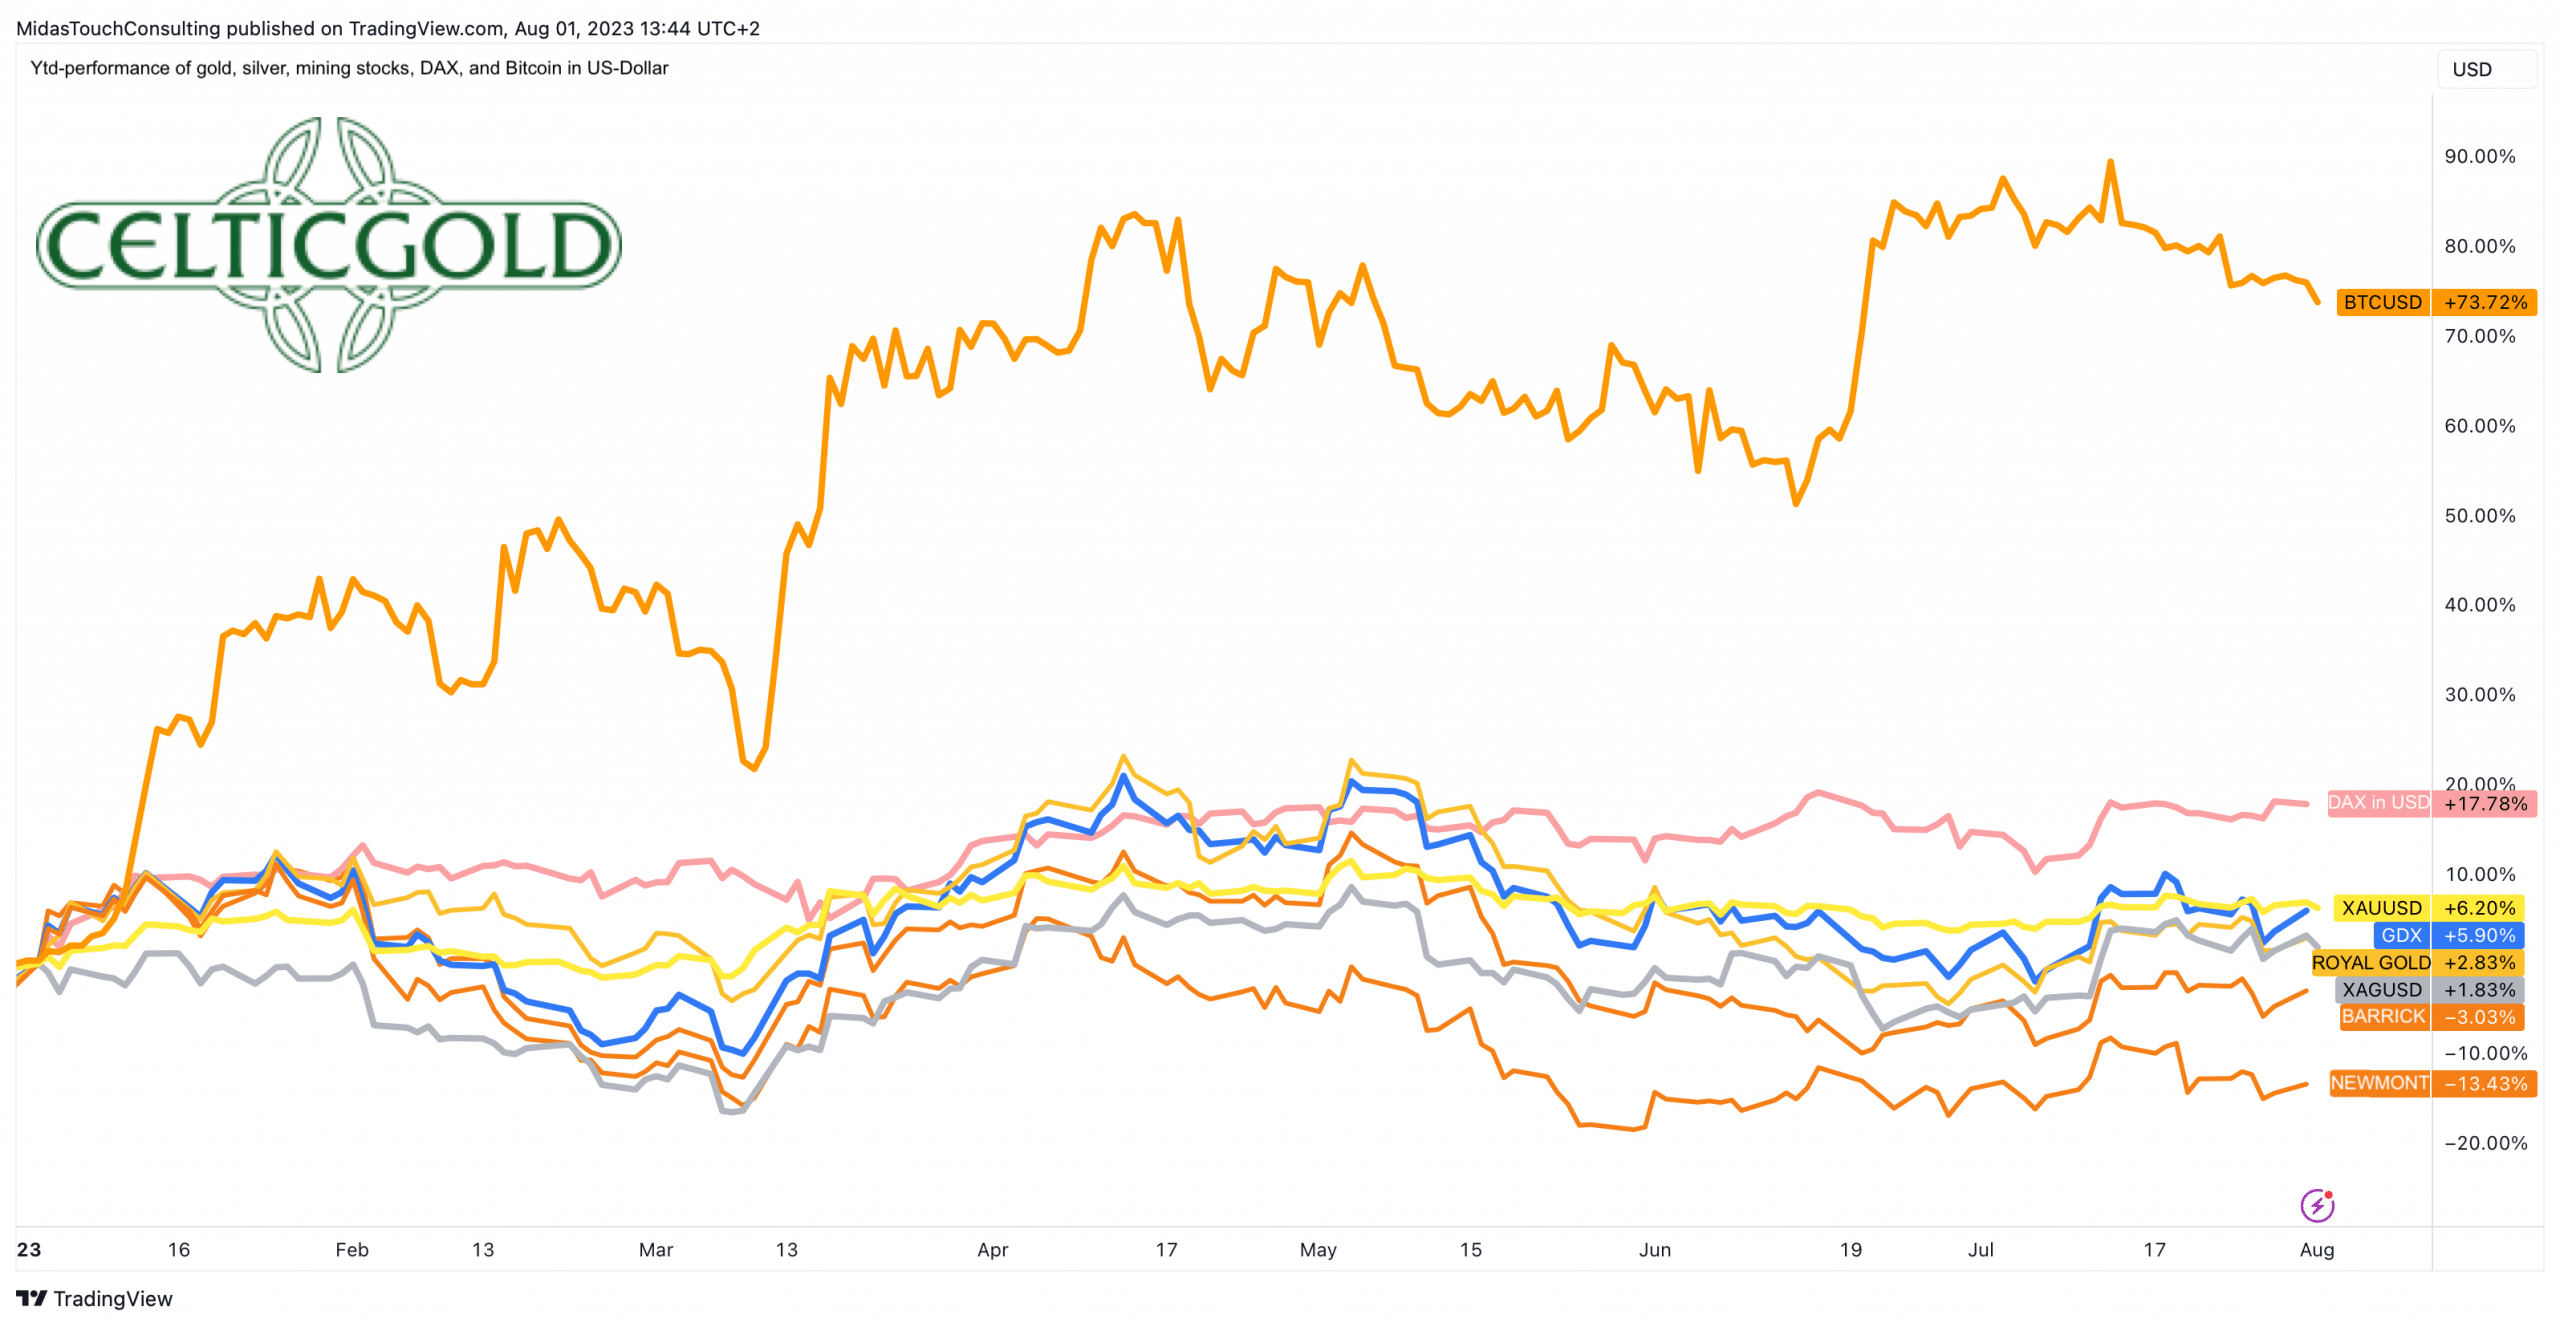 Ytd-performance of gold, silver, mining stocks, DAX, and Bitcoin in US-Dollar, as of August 2nd, 2023. Source: Tradingview. August 5th, 2023, Gold - Summer rally and power showdown in August